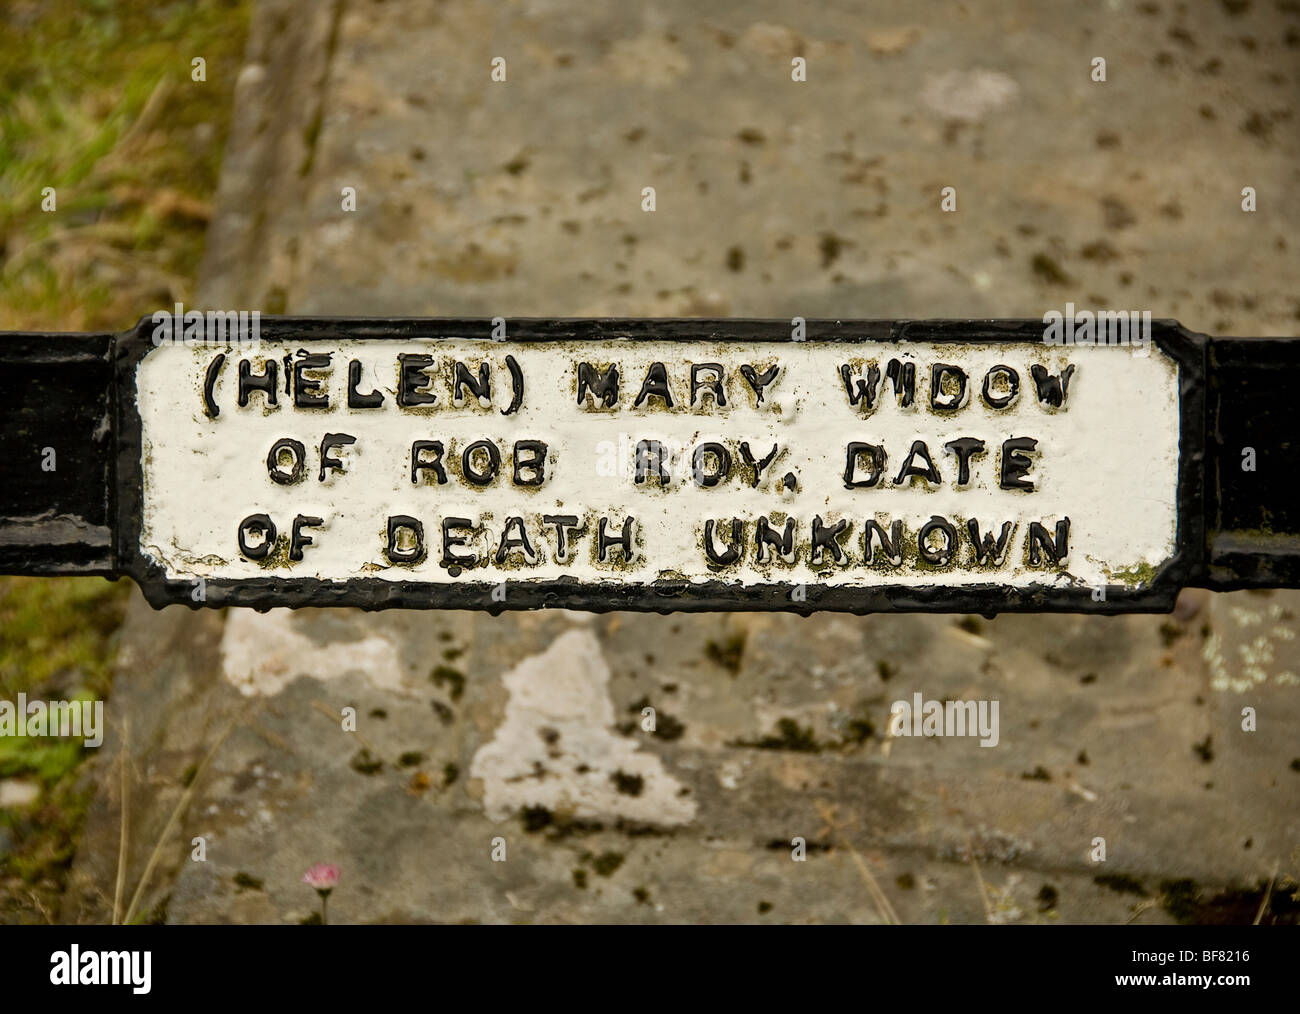 Rob Roys Grave. Closeup of his wife, Helen Mary MacGregor's name plaque on the family grave in Balquhidder. Scotland Stock Photo